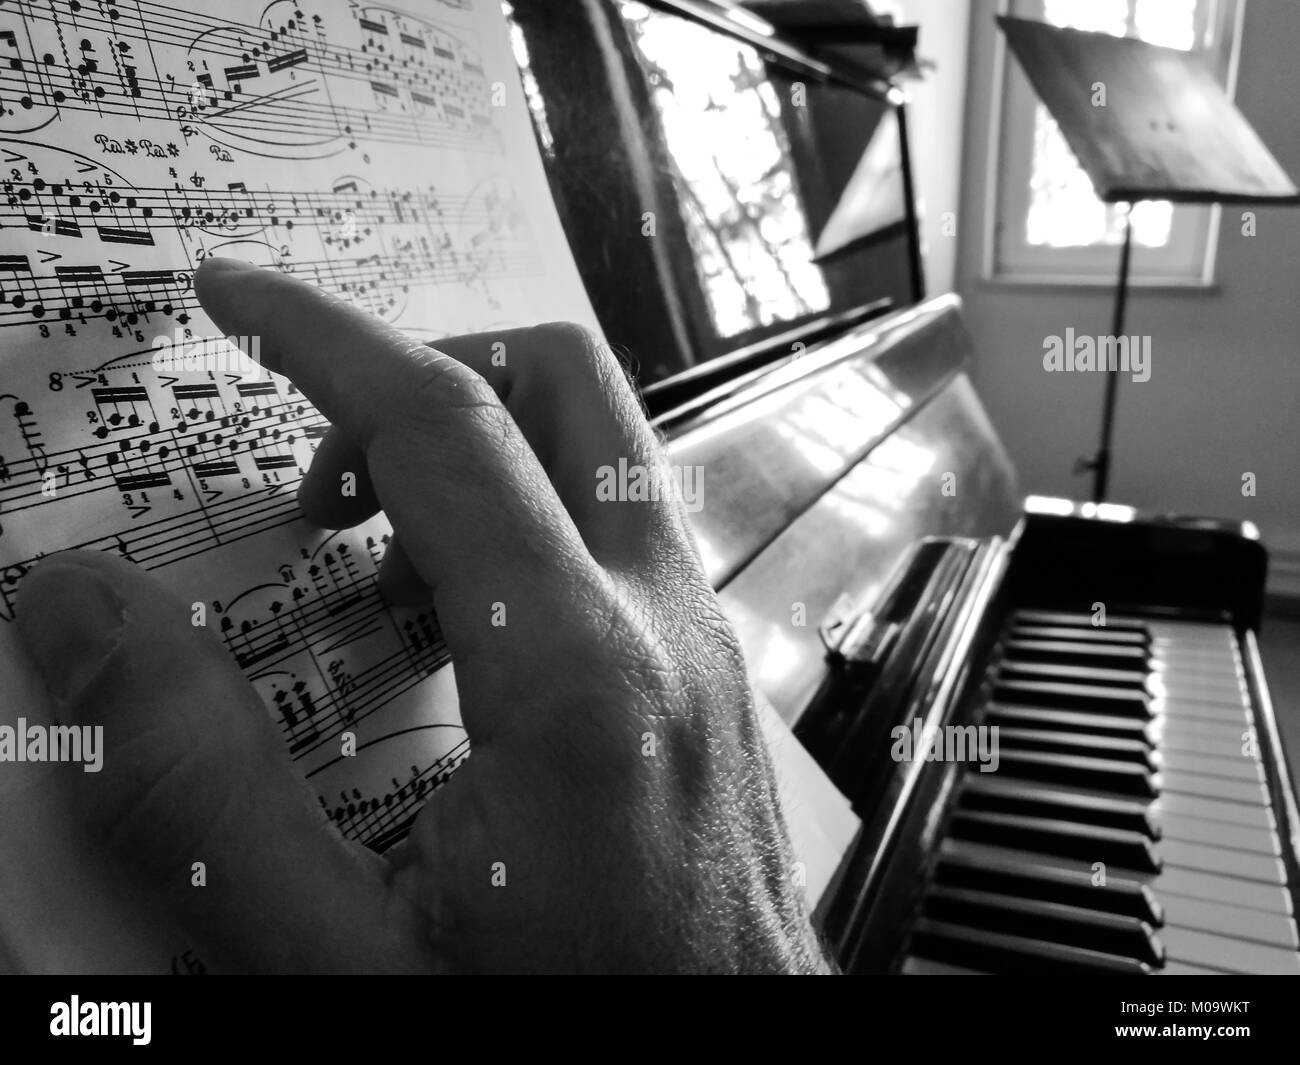 A male hand is on a piano sheet music touching the paper like he is playing. An acoustic piano and a music stand in the background. Stock Photo